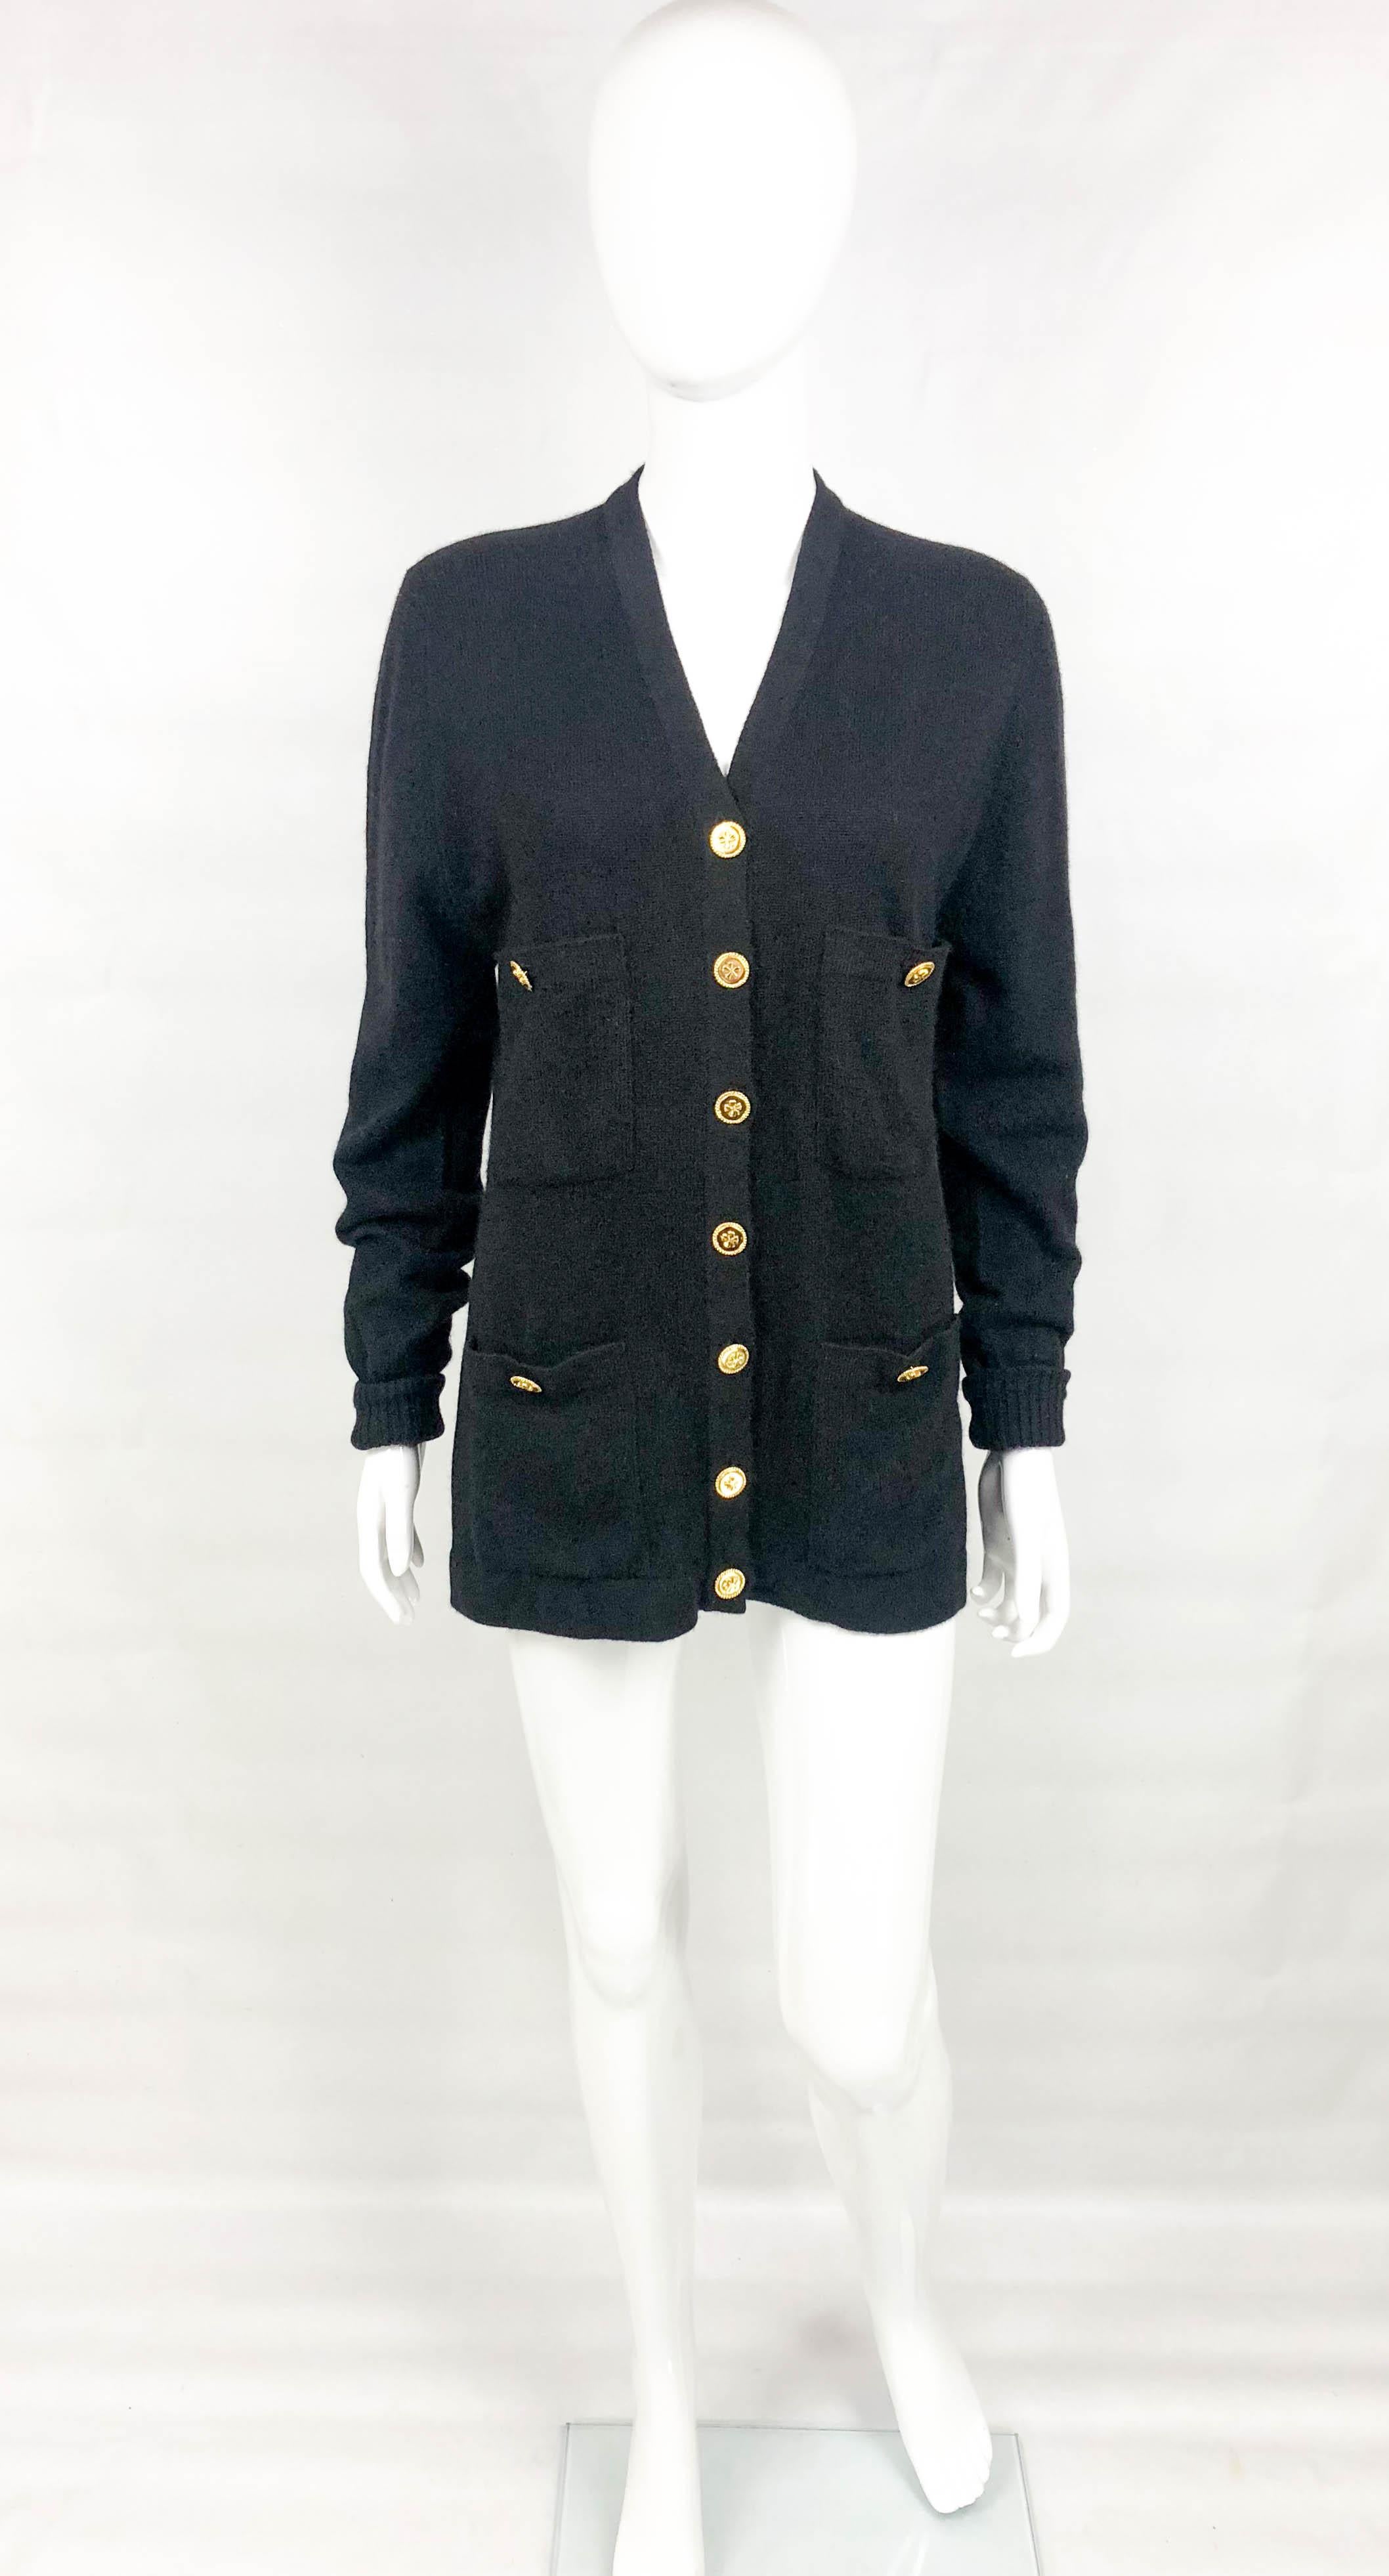 Vintage Chanel Black Cashmere Cardigan. This stylish cardigan by Chanel dates back from the 1990’s. Made in black cashmere, it features 4 front square pockets. The gilt buttons show a clover in the centre. A versatile piece for the chic